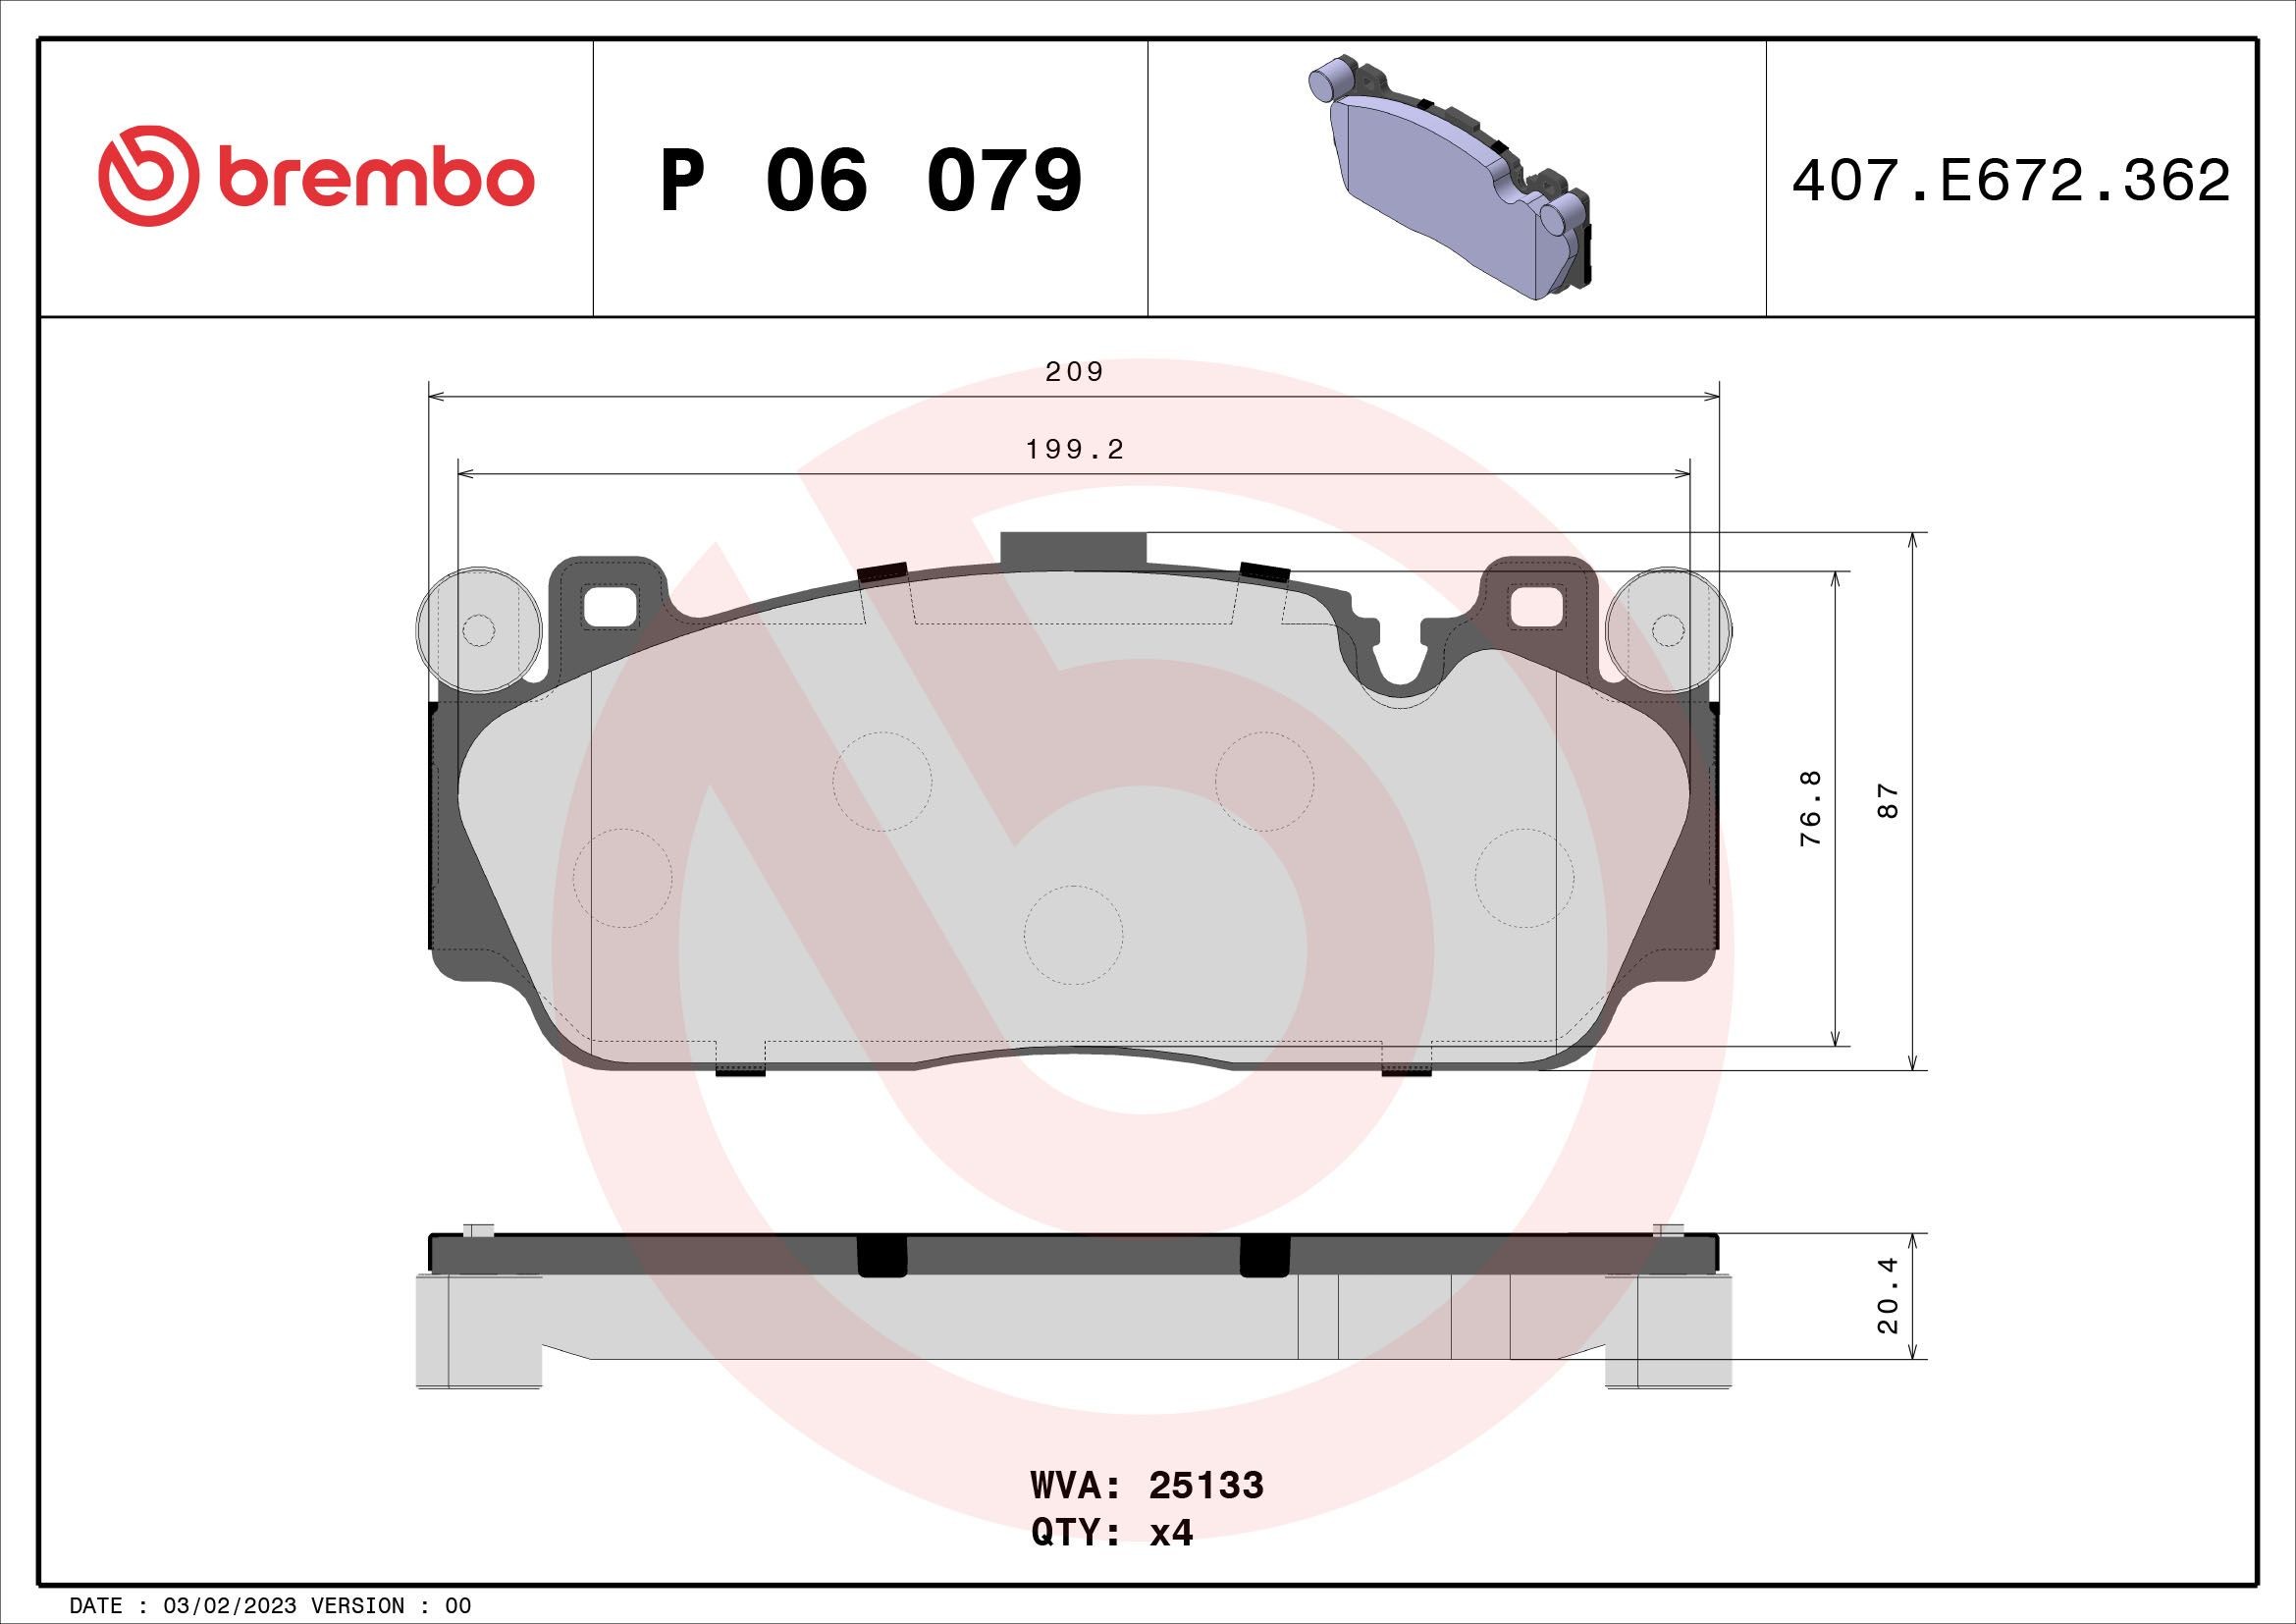 BREMBO P 06 079 Brake pad set prepared for wear indicator, without accessories